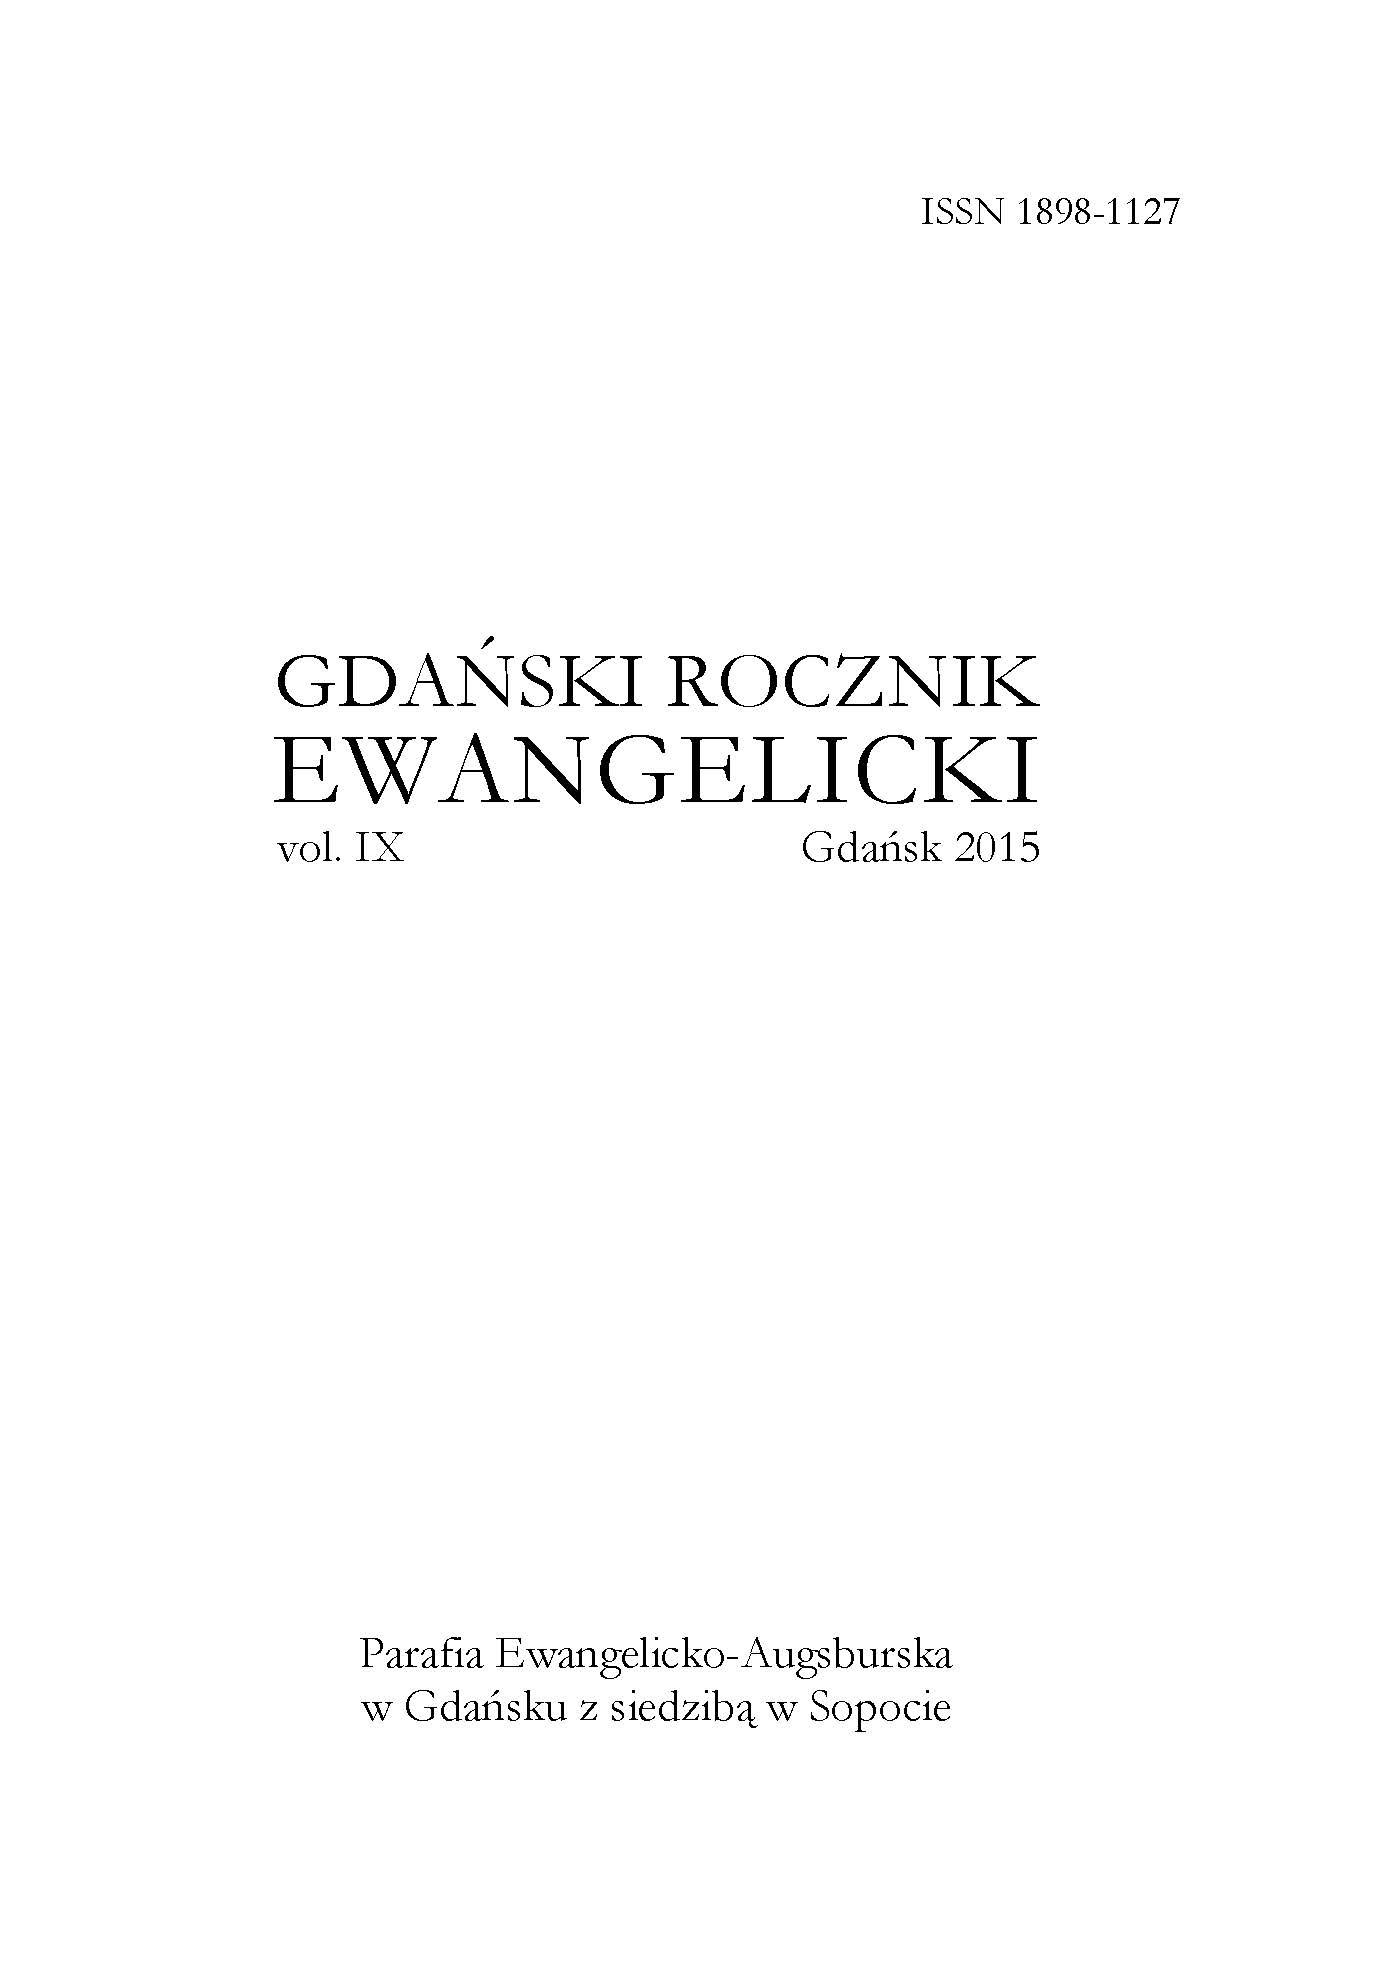 The Revivalist Evangelical Movement contra National
Standpoints. The Small Group Movement in Masuria in the Nineteenth and Twentieth Centuries. Part II (1945 – 1956) Cover Image